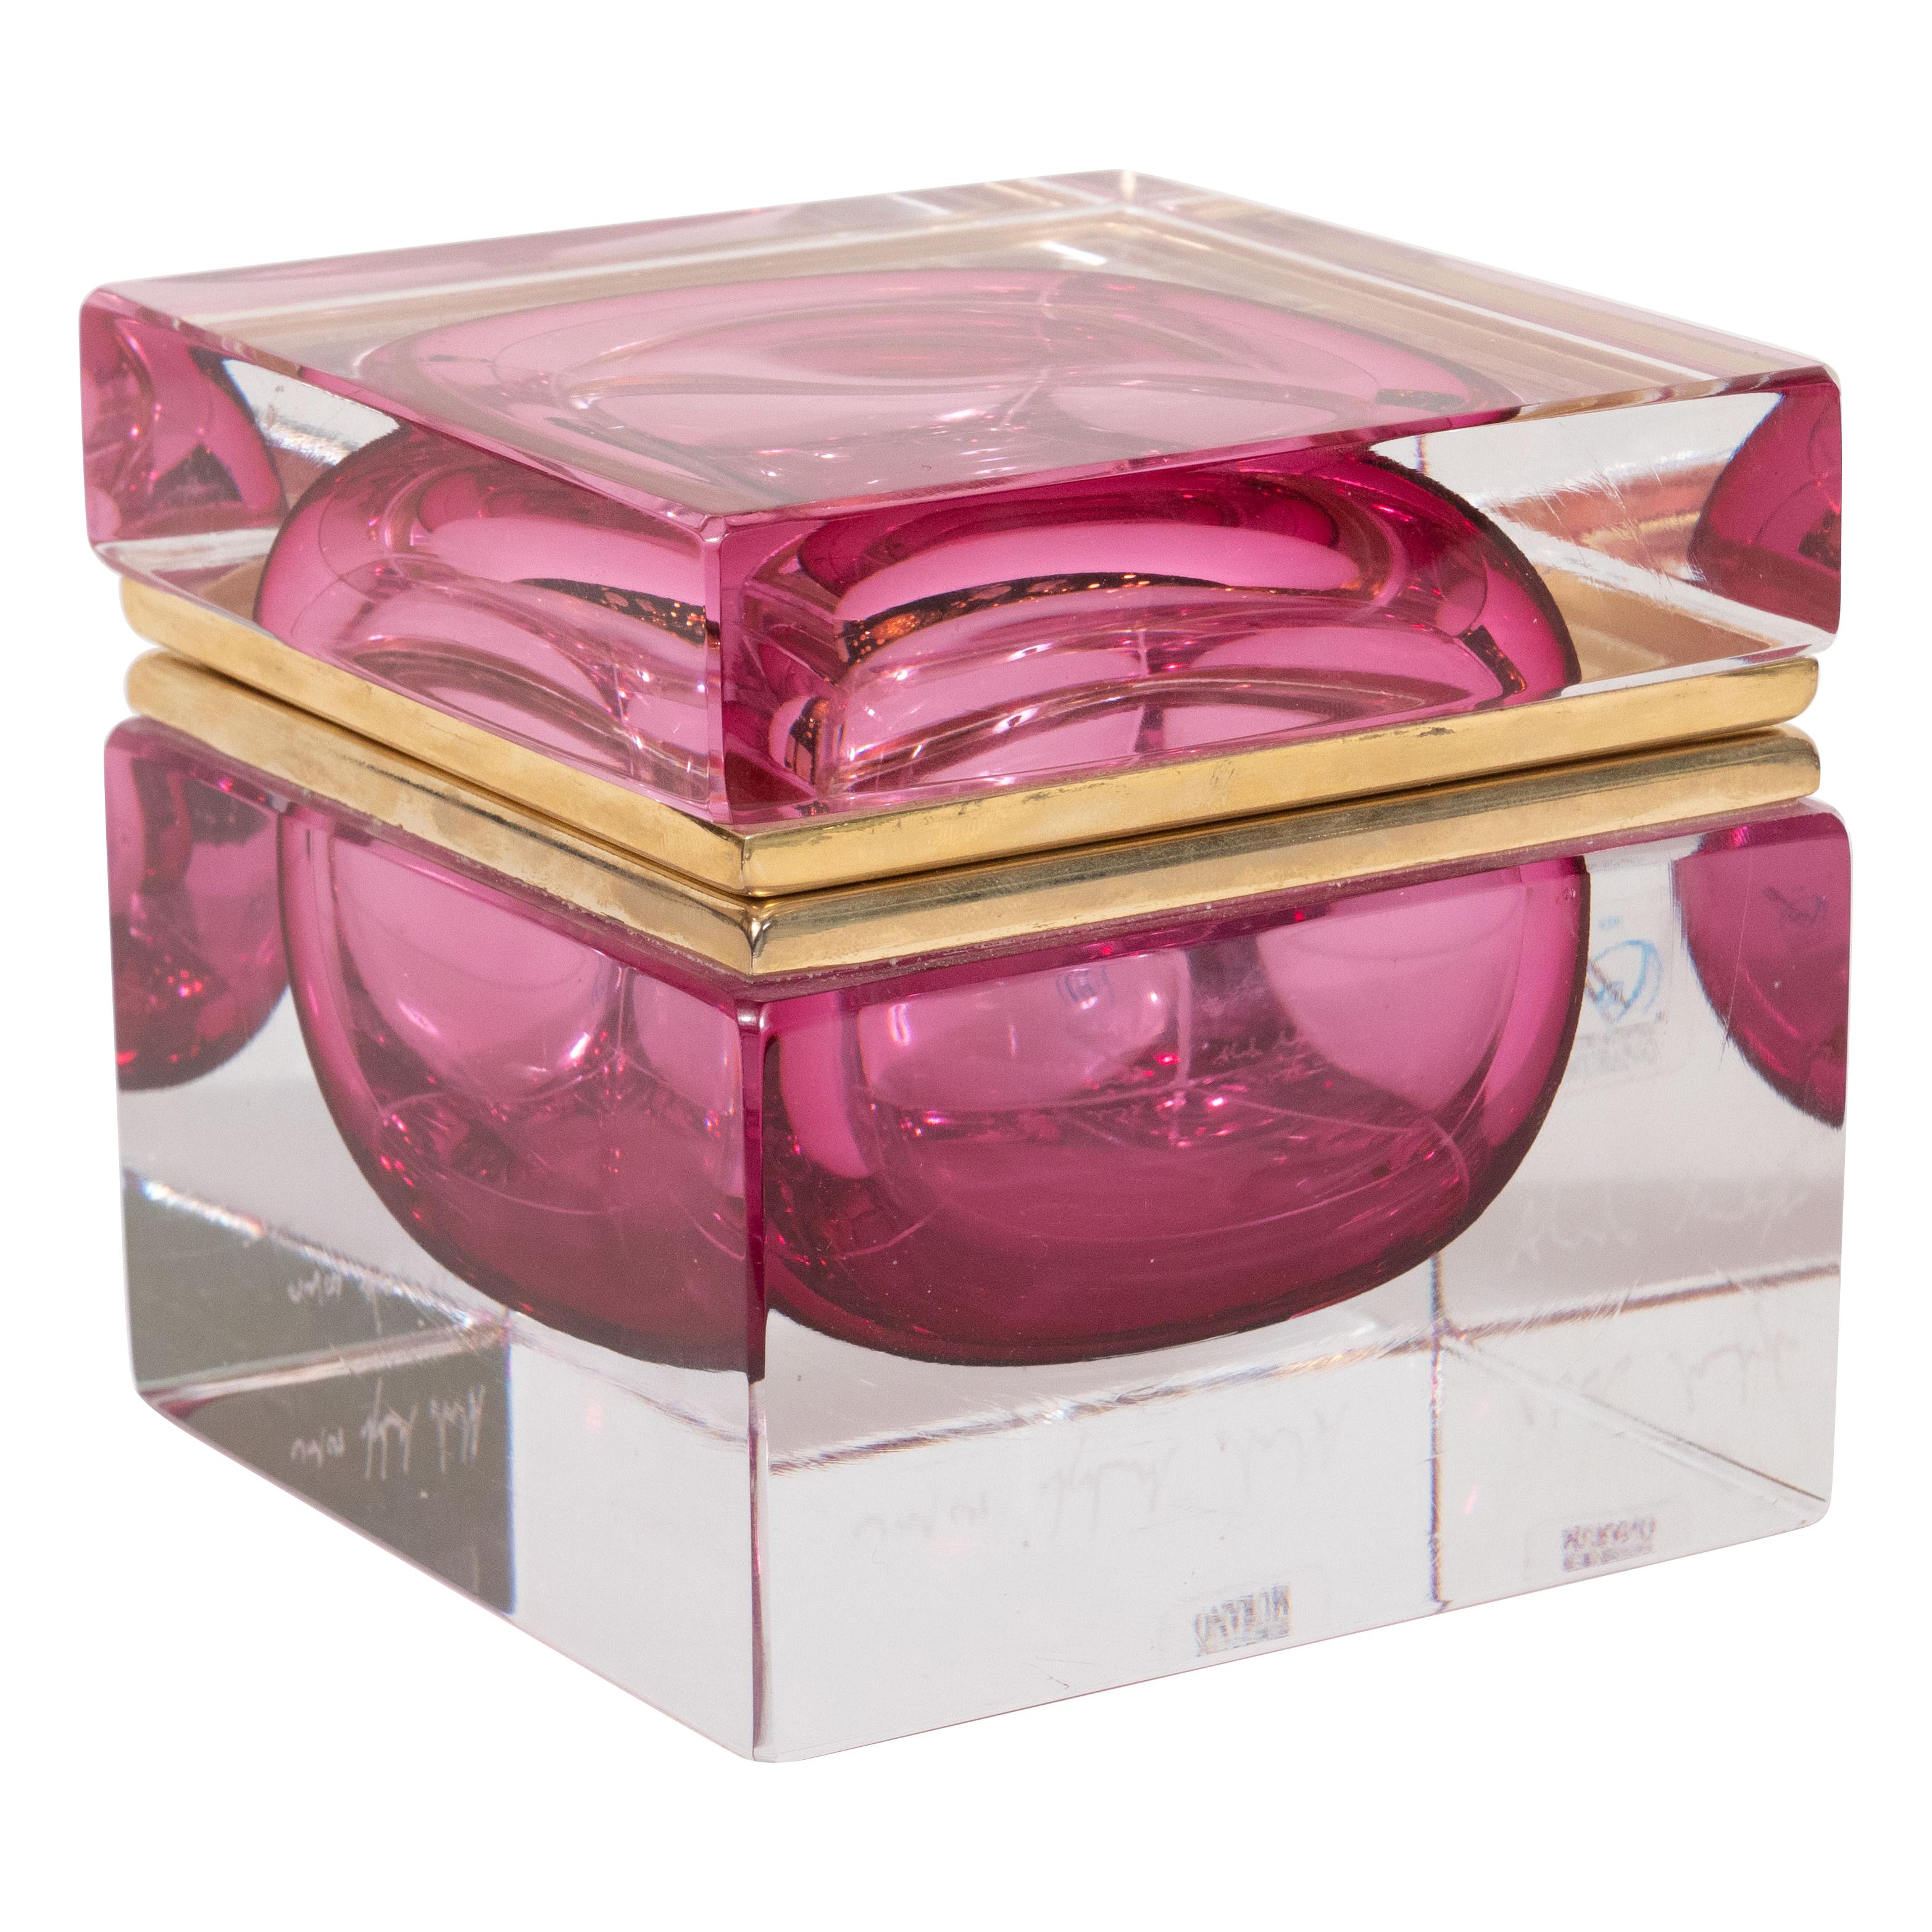 This midcentury glass box was designed by Alessandro Mandruzzato and hand blown in Murano, Italy, circa 1970. The box was created using the Sommerso technique where an inner core is blown and then submerged into molten glass of a contrasting color.